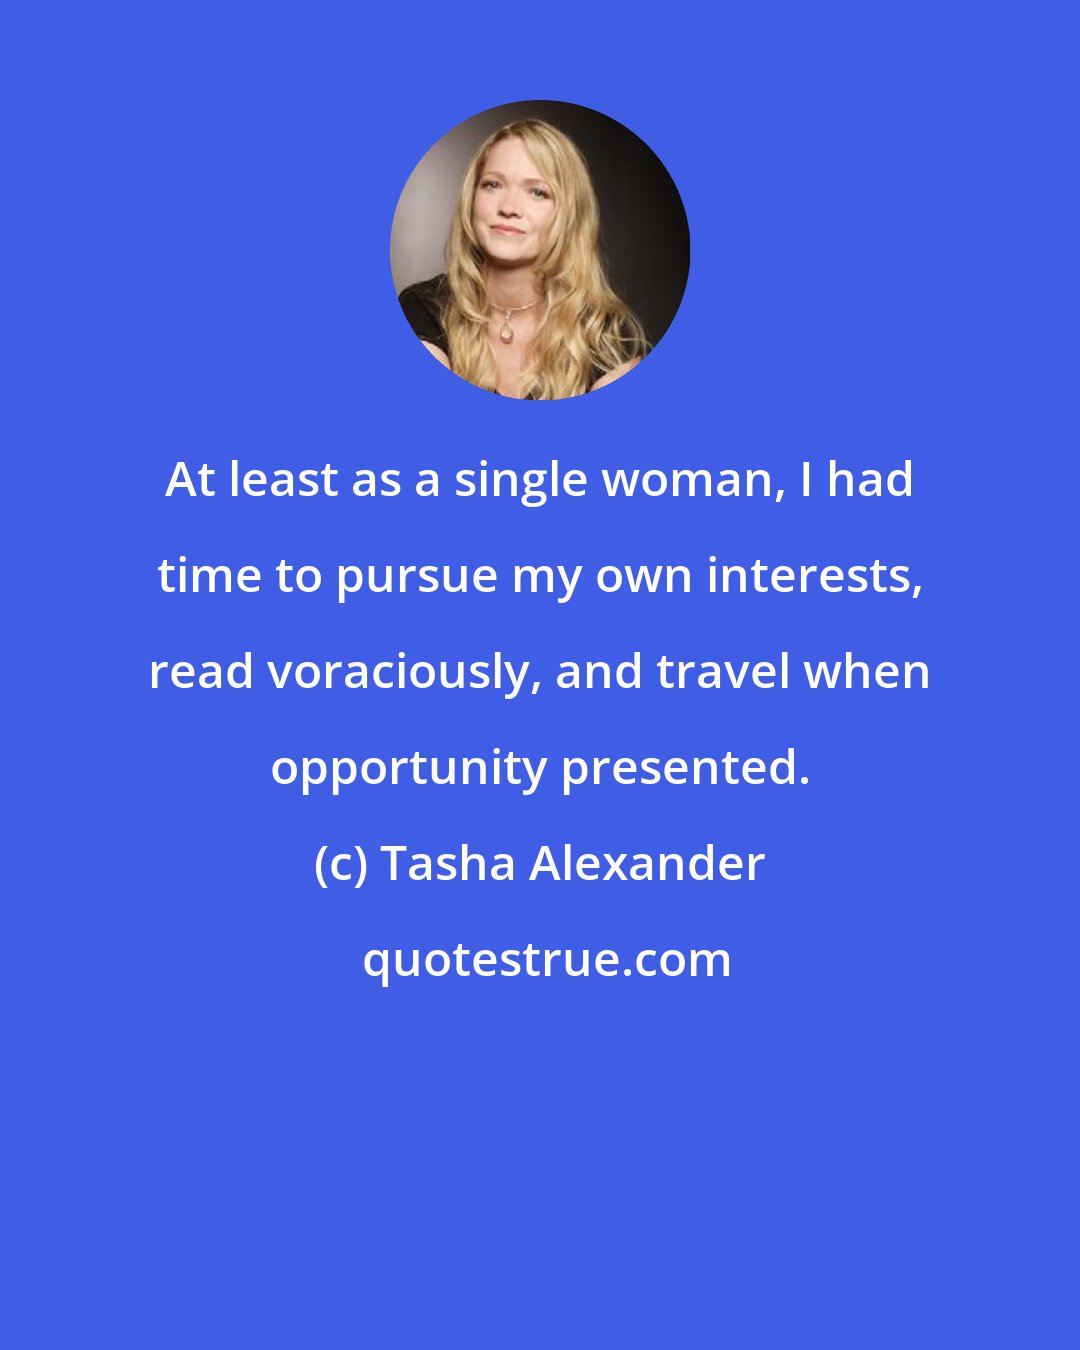 Tasha Alexander: At least as a single woman, I had time to pursue my own interests, read voraciously, and travel when opportunity presented.